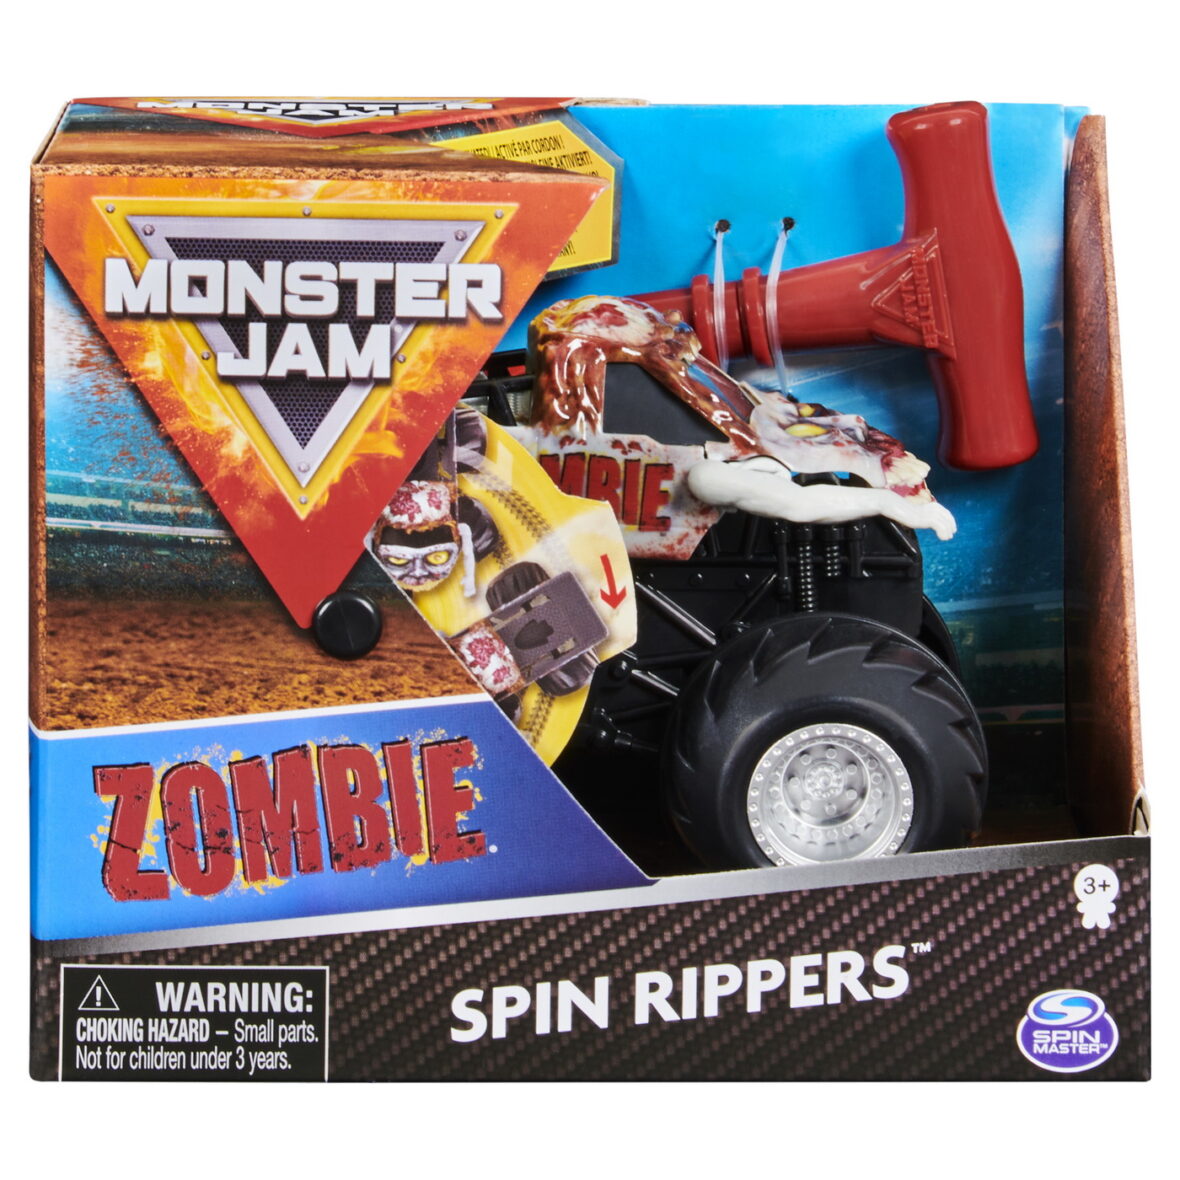 Monster Jam Zombie Seria Spin Rippers Scara 1 La 43